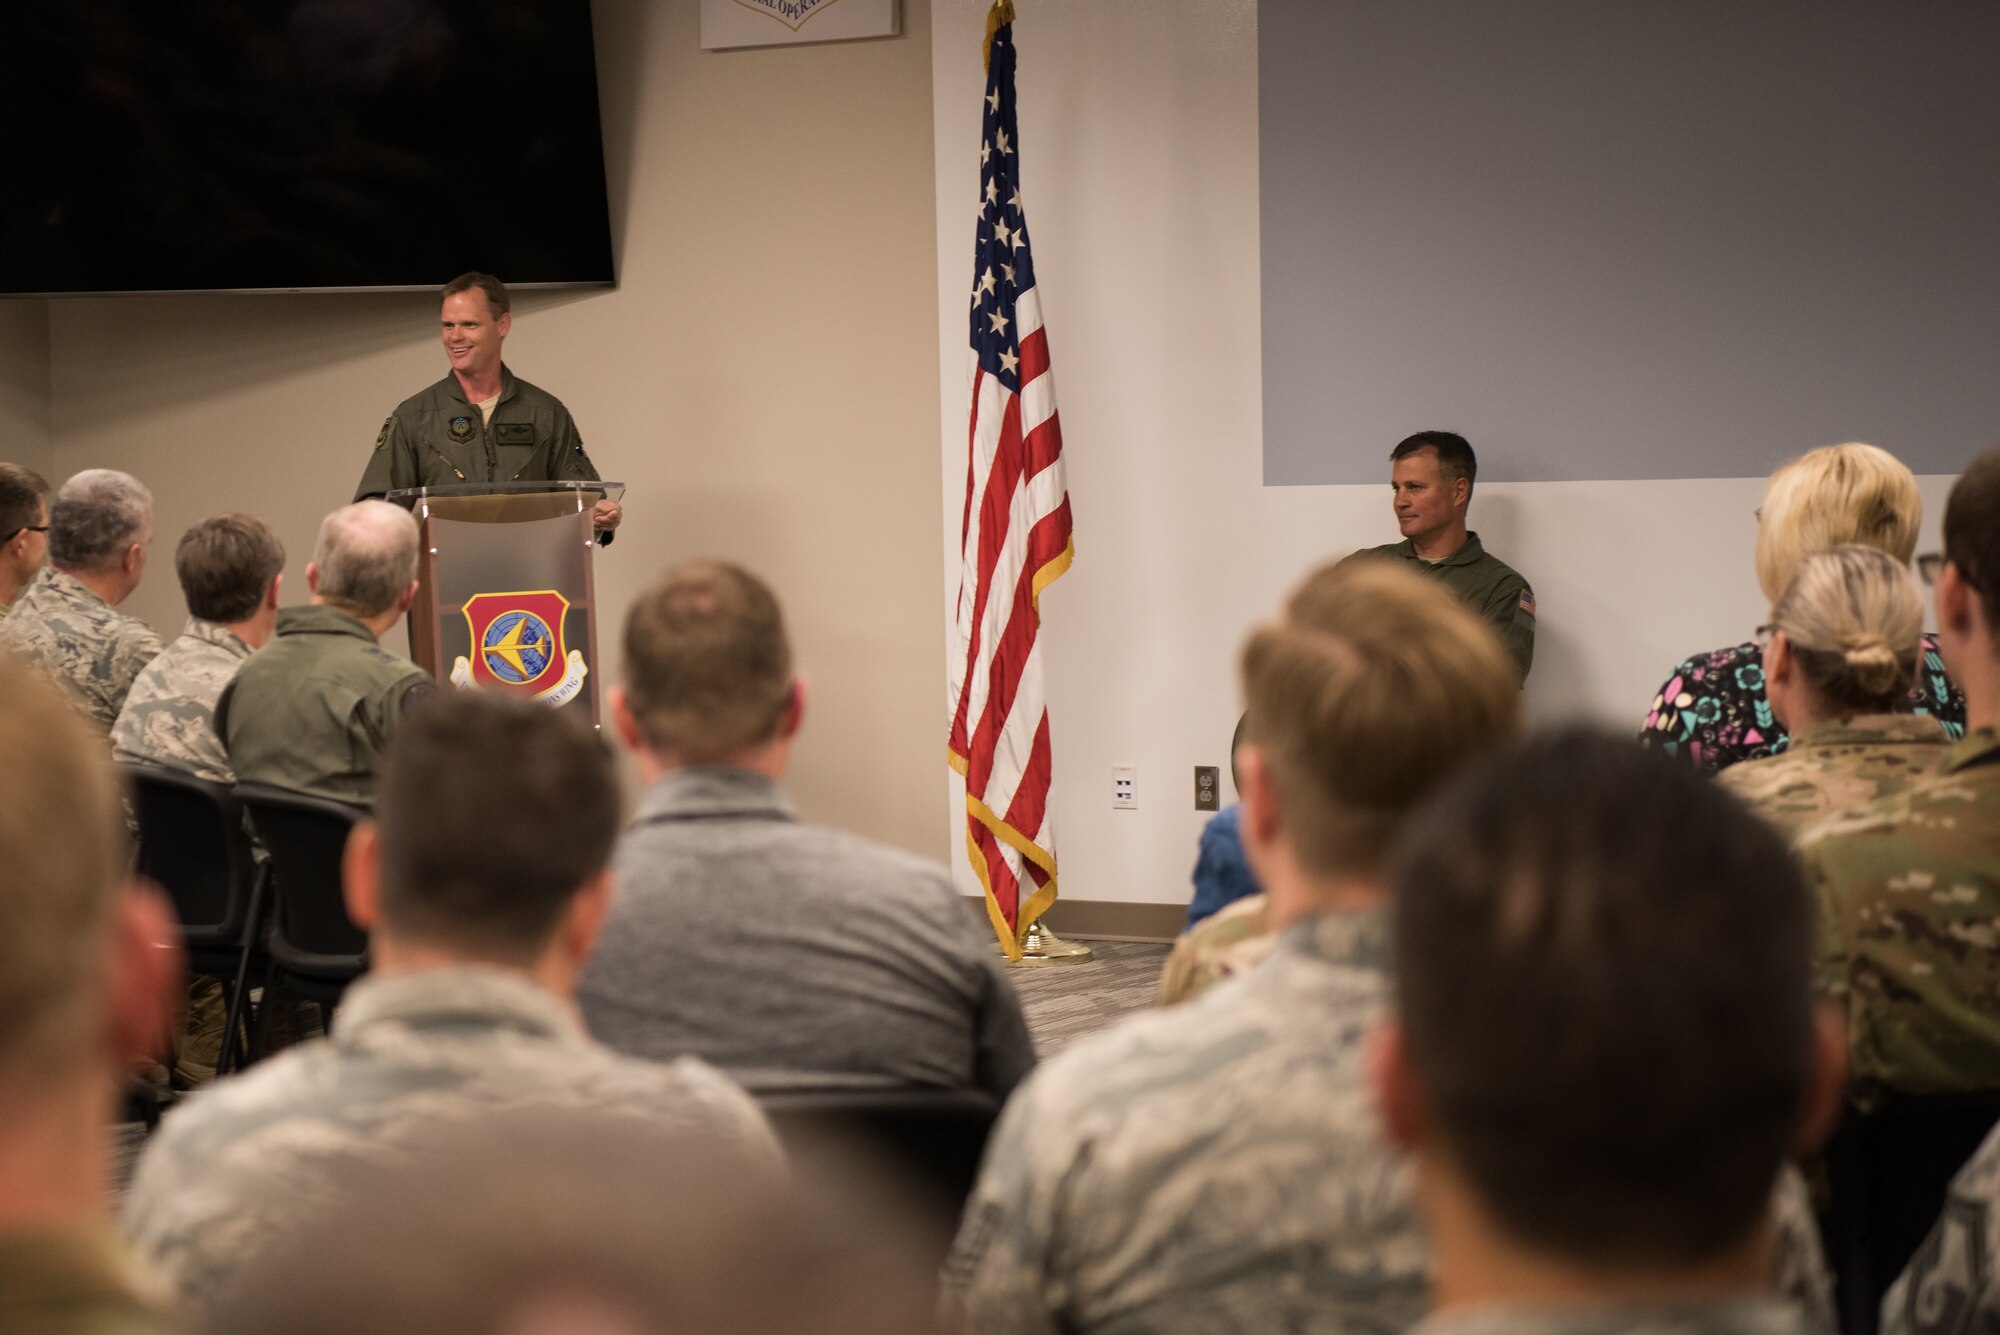 Col. Daniel R. “Pinto” Fowler, incoming 137th Special Operations Group commander (left), speaks to attendees as Col. Devin R. Wooden, 137th Special Operations Wing commander (right), listens during the Group’s change of command ceremony at Will Rogers Air National Guard Base in Oklahoma City, May 17, 2018. Fowler, formerly the Air National Guard's Advisor to U.S. Air Force Special Operations Command, Hurlbert Field, Fla., assumed command with more than 20 years of military experience, including three years as a Joint Terminal Attack Control qualified Air Liaison Officer and 12 years of flying. (U.S. Air National Guard photo by Staff Sgt. Kasey Phipps)